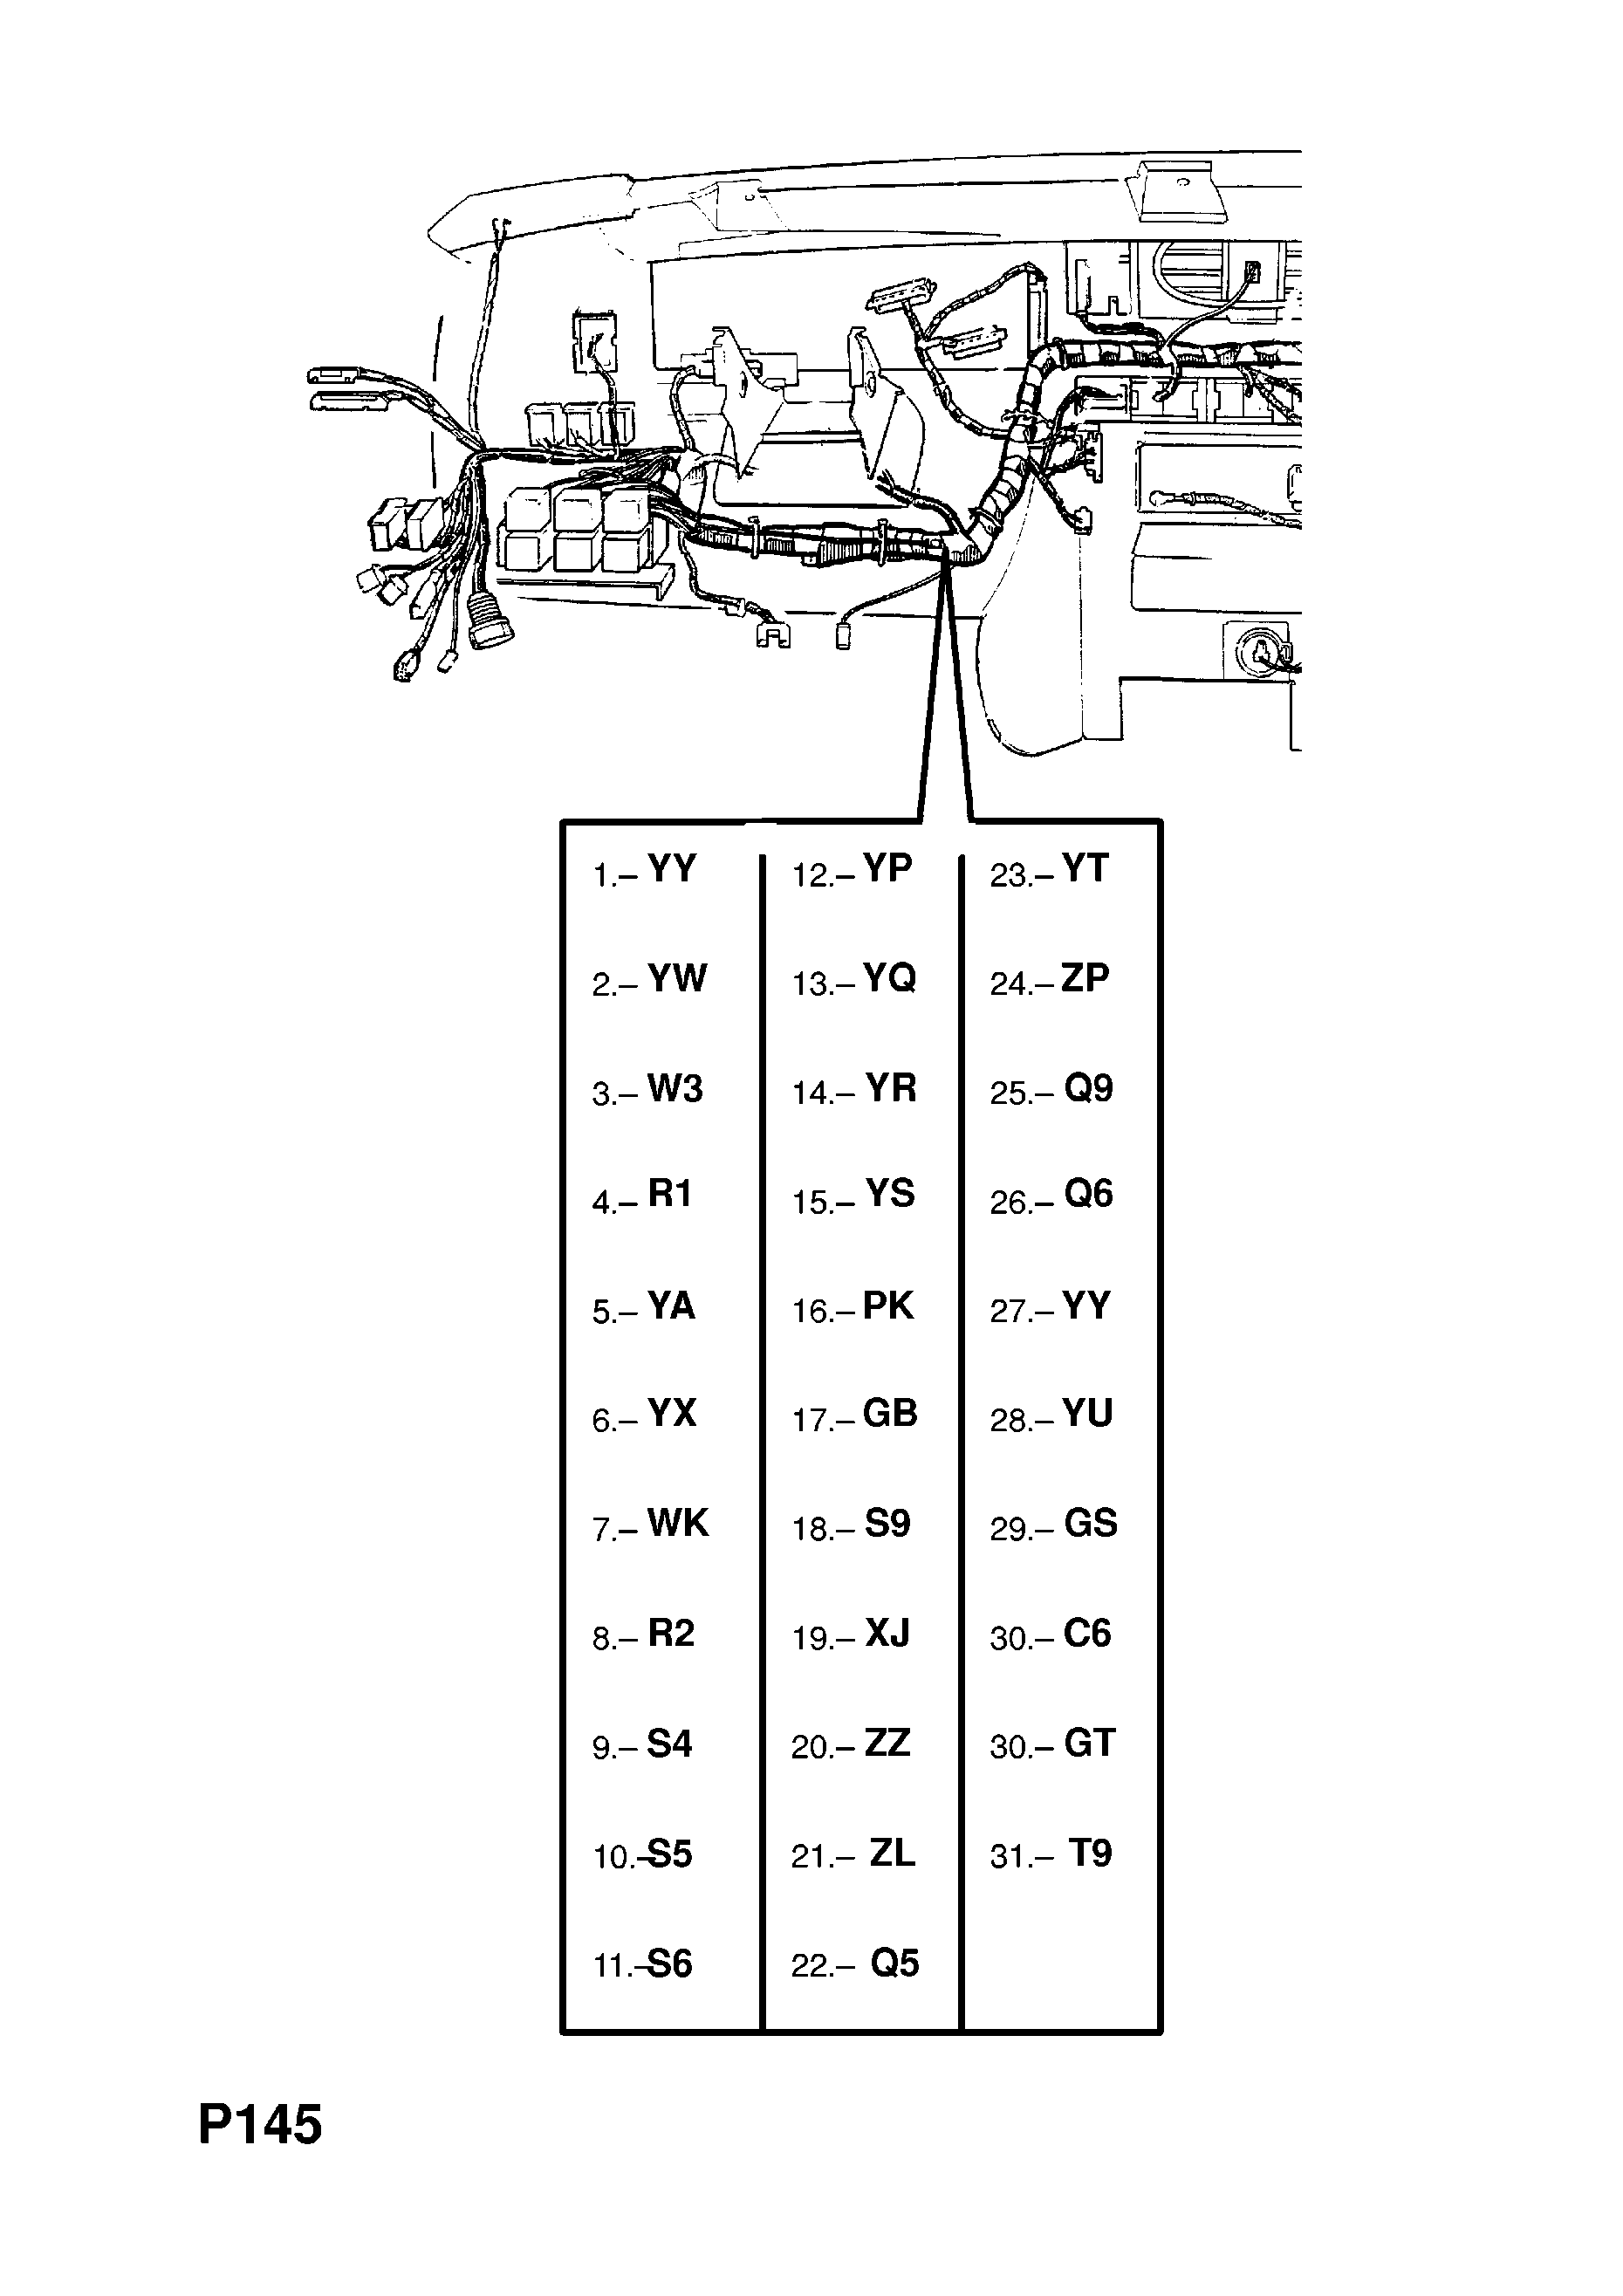 INSTRUMENT PANEL WIRING HARNESS (CONTD.) <small><i>[M1000001 (CONTD.) EXCEPT AIR CONDITIONING, AUTOMATIC TRANSMISSION OR LCD INSTRUMENTS (CONTD.)]</i></small>